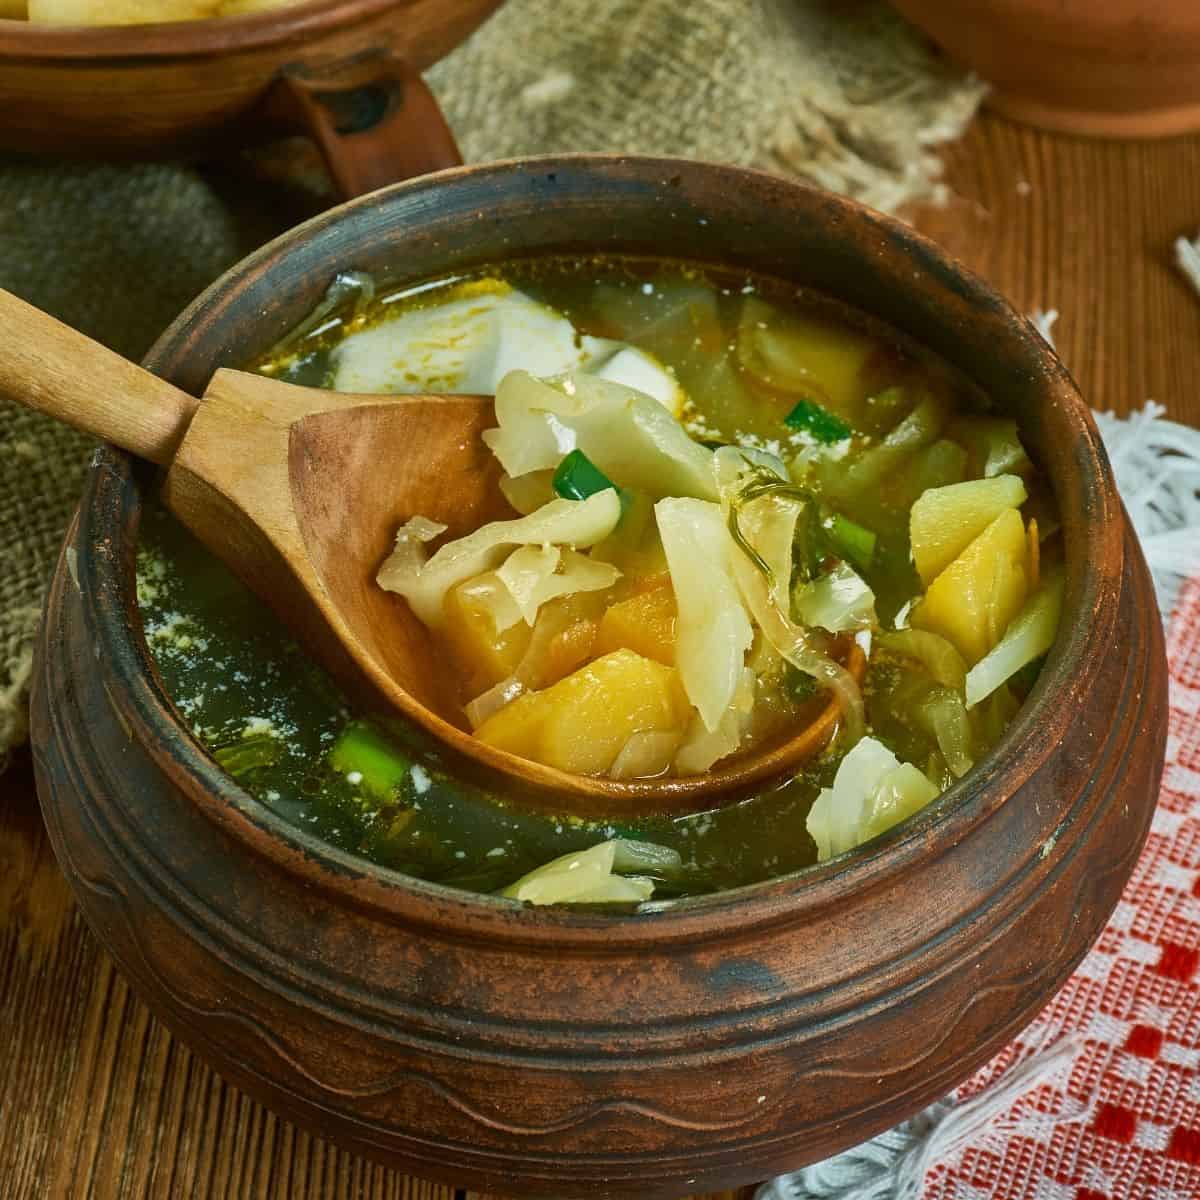 Love Turnips? Choose From These 11 Tasty Turnip Soup Recipes